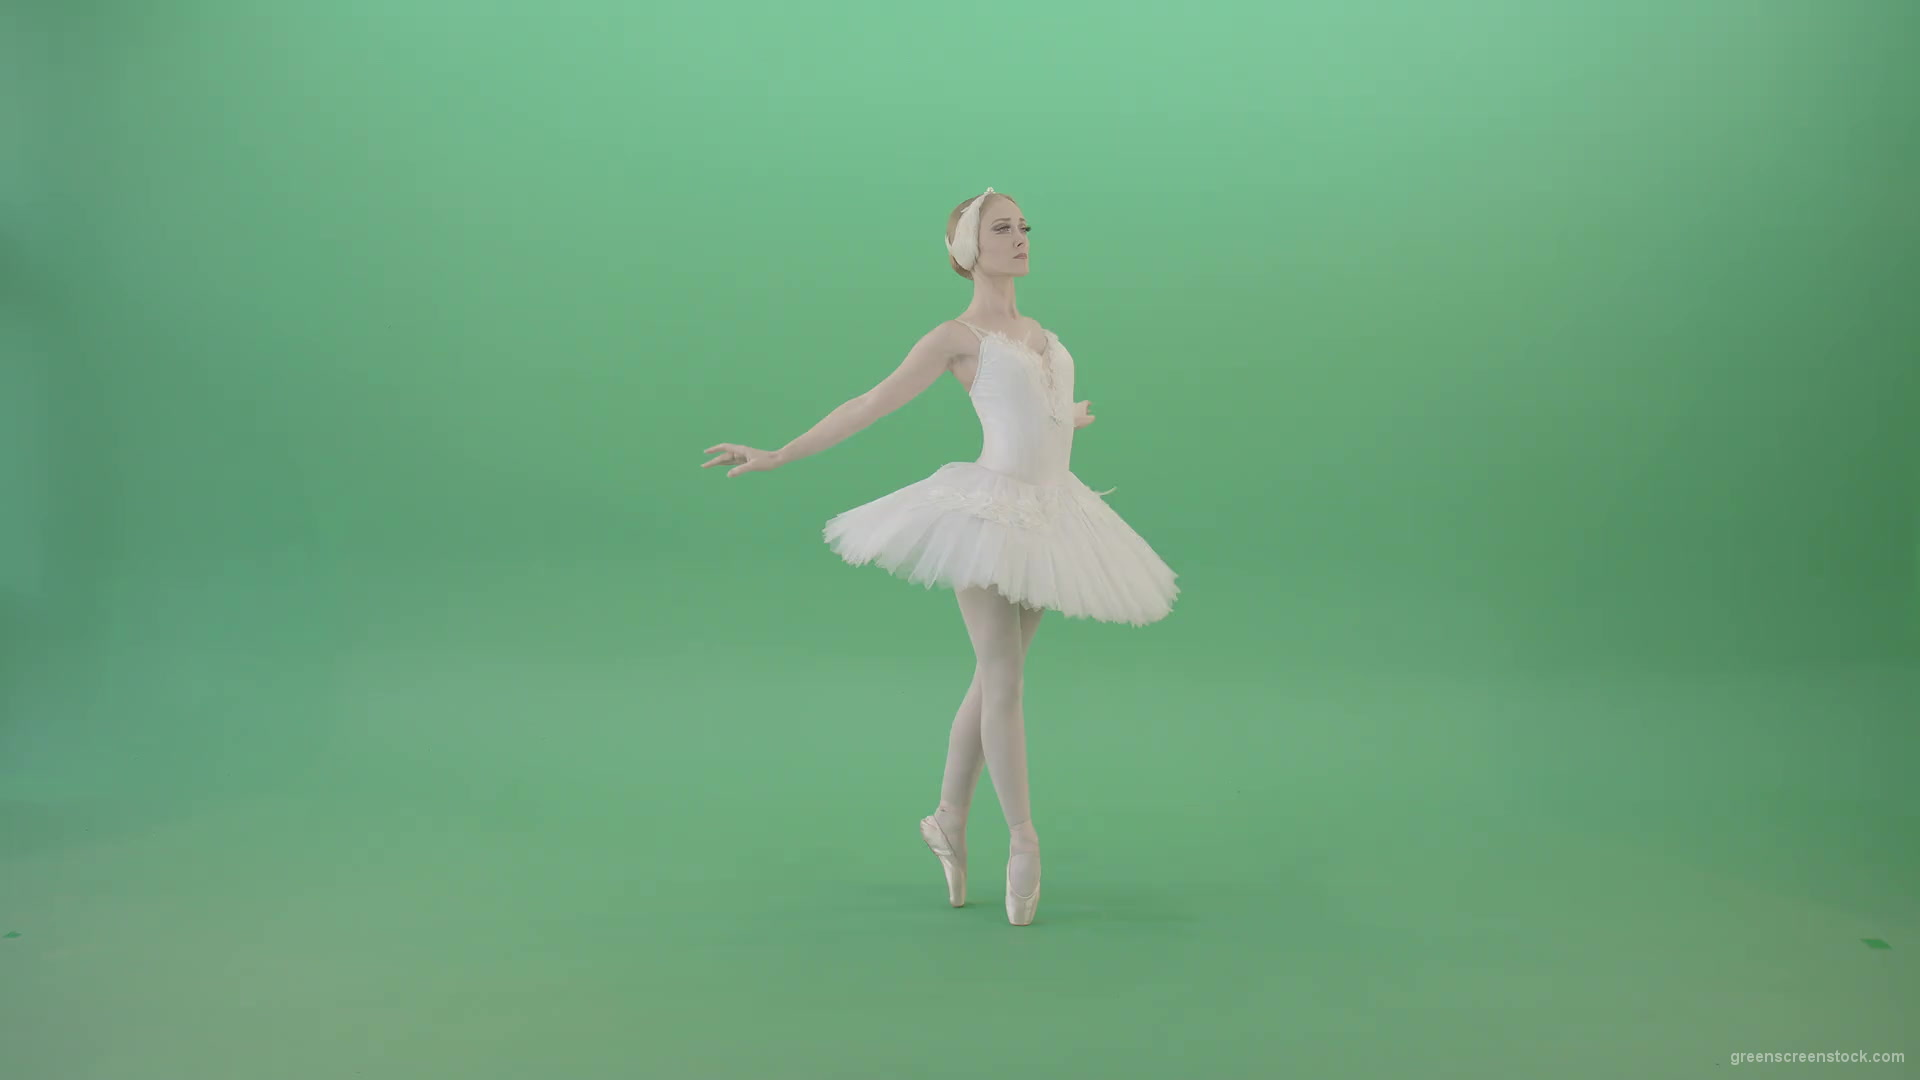 Fashion-snow-white-ballet-dancing-girl-showing-swan-lake-dance-isolated-on-Green-Screen-4K-Video-Footage-1920_001 Green Screen Stock